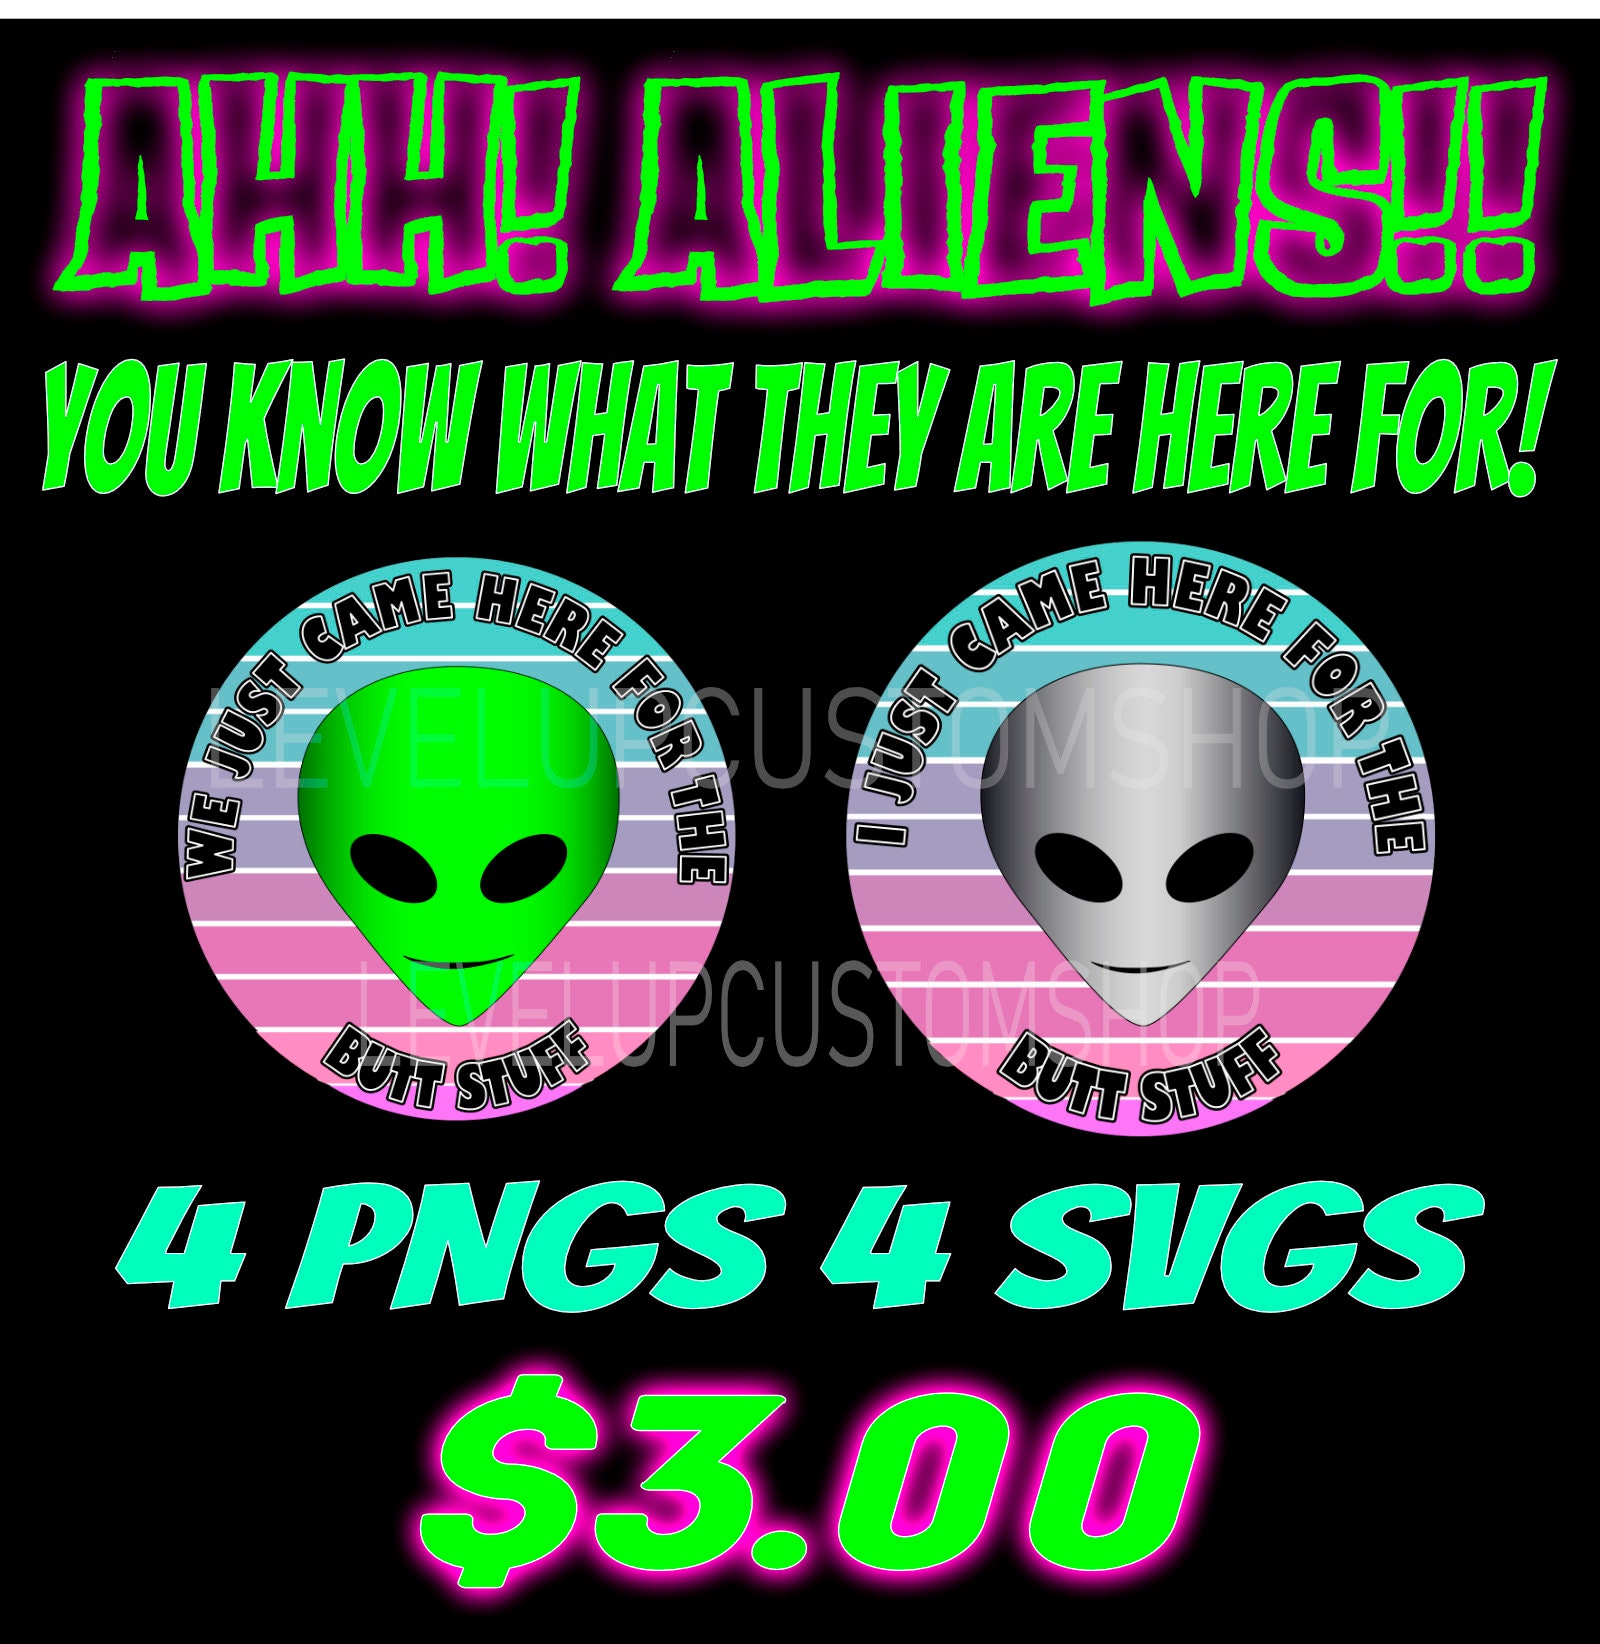 Aliens We Just Came Here for the Butt Stuff Design Funny photo